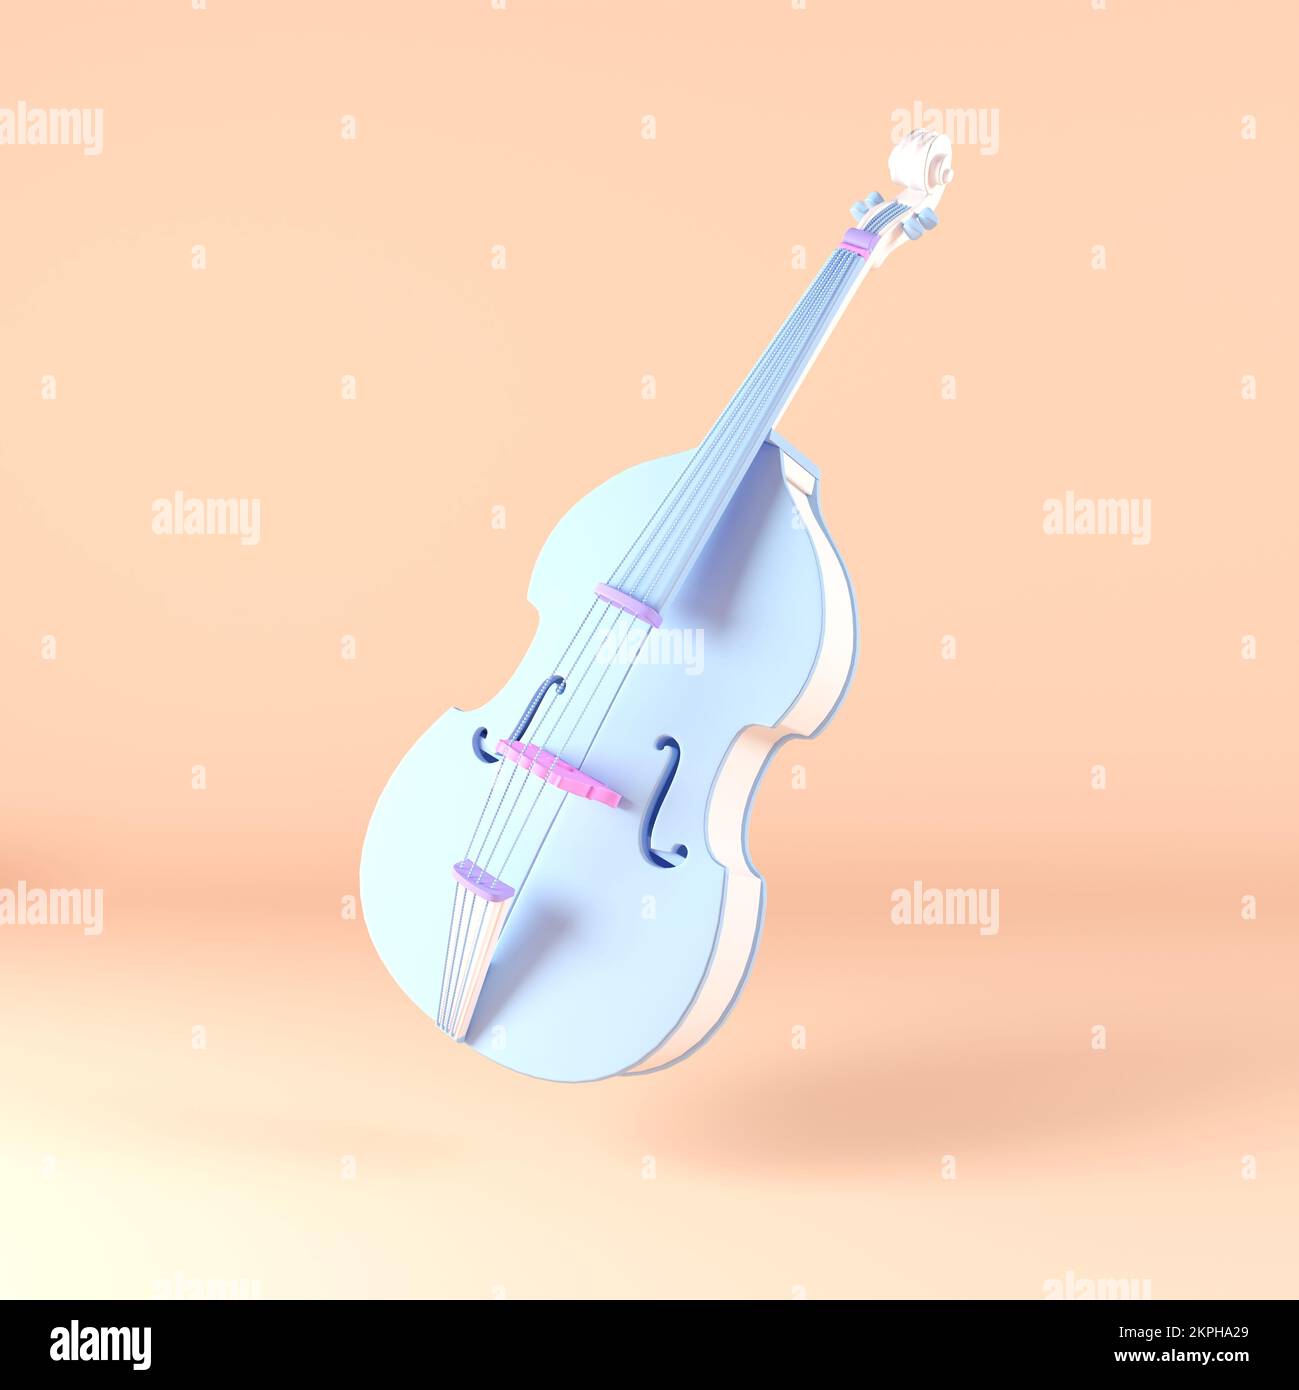 Violin Traditional Musical Instrument cartoon style 3d illustration render. A concept for a musician, composer, author of music, music service. Stock Photo